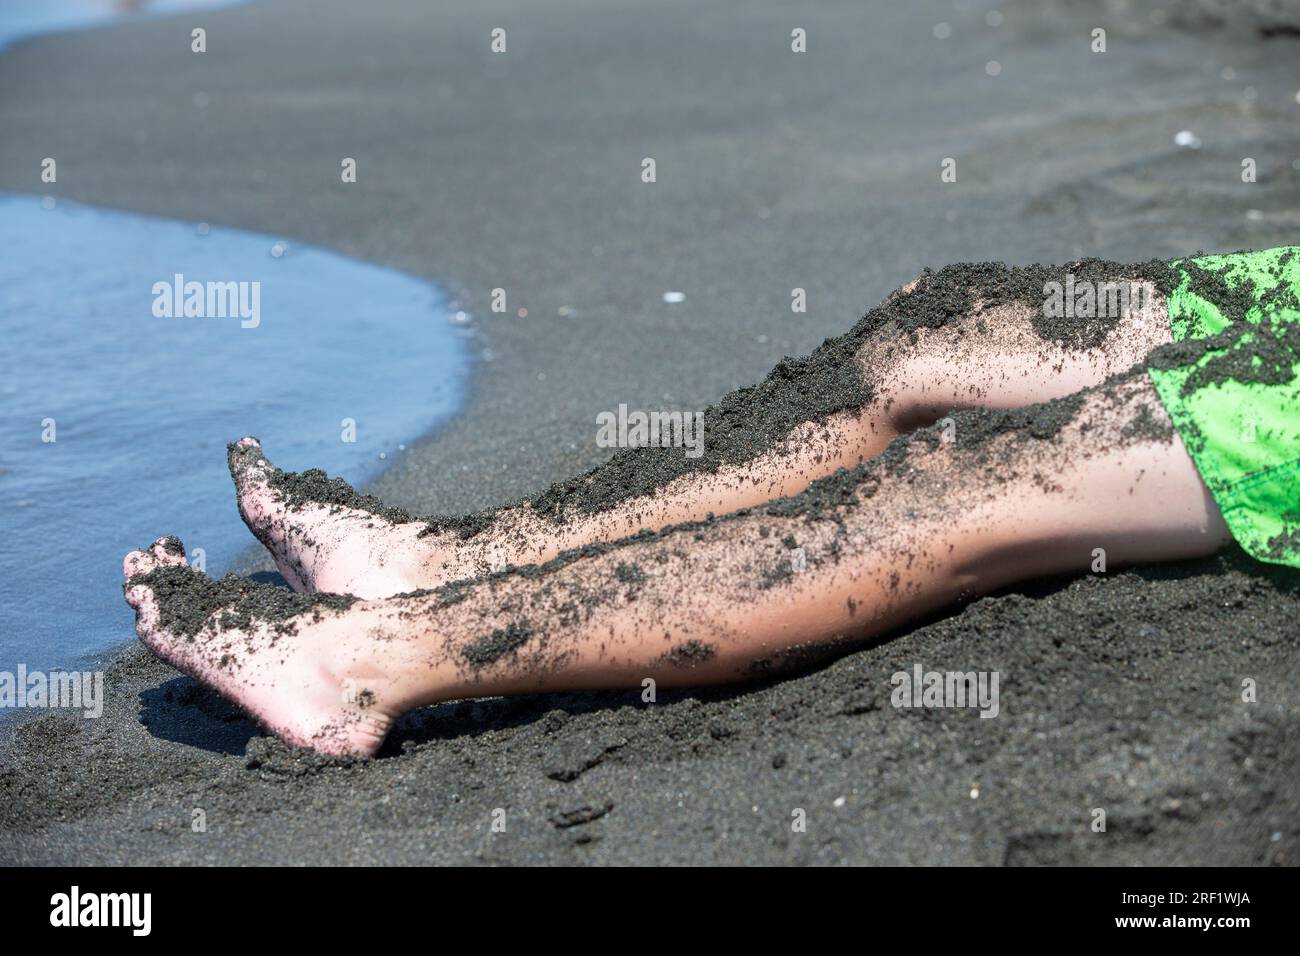 The child's feet are covered with therapeutic black magnetic sand. Stock Photo